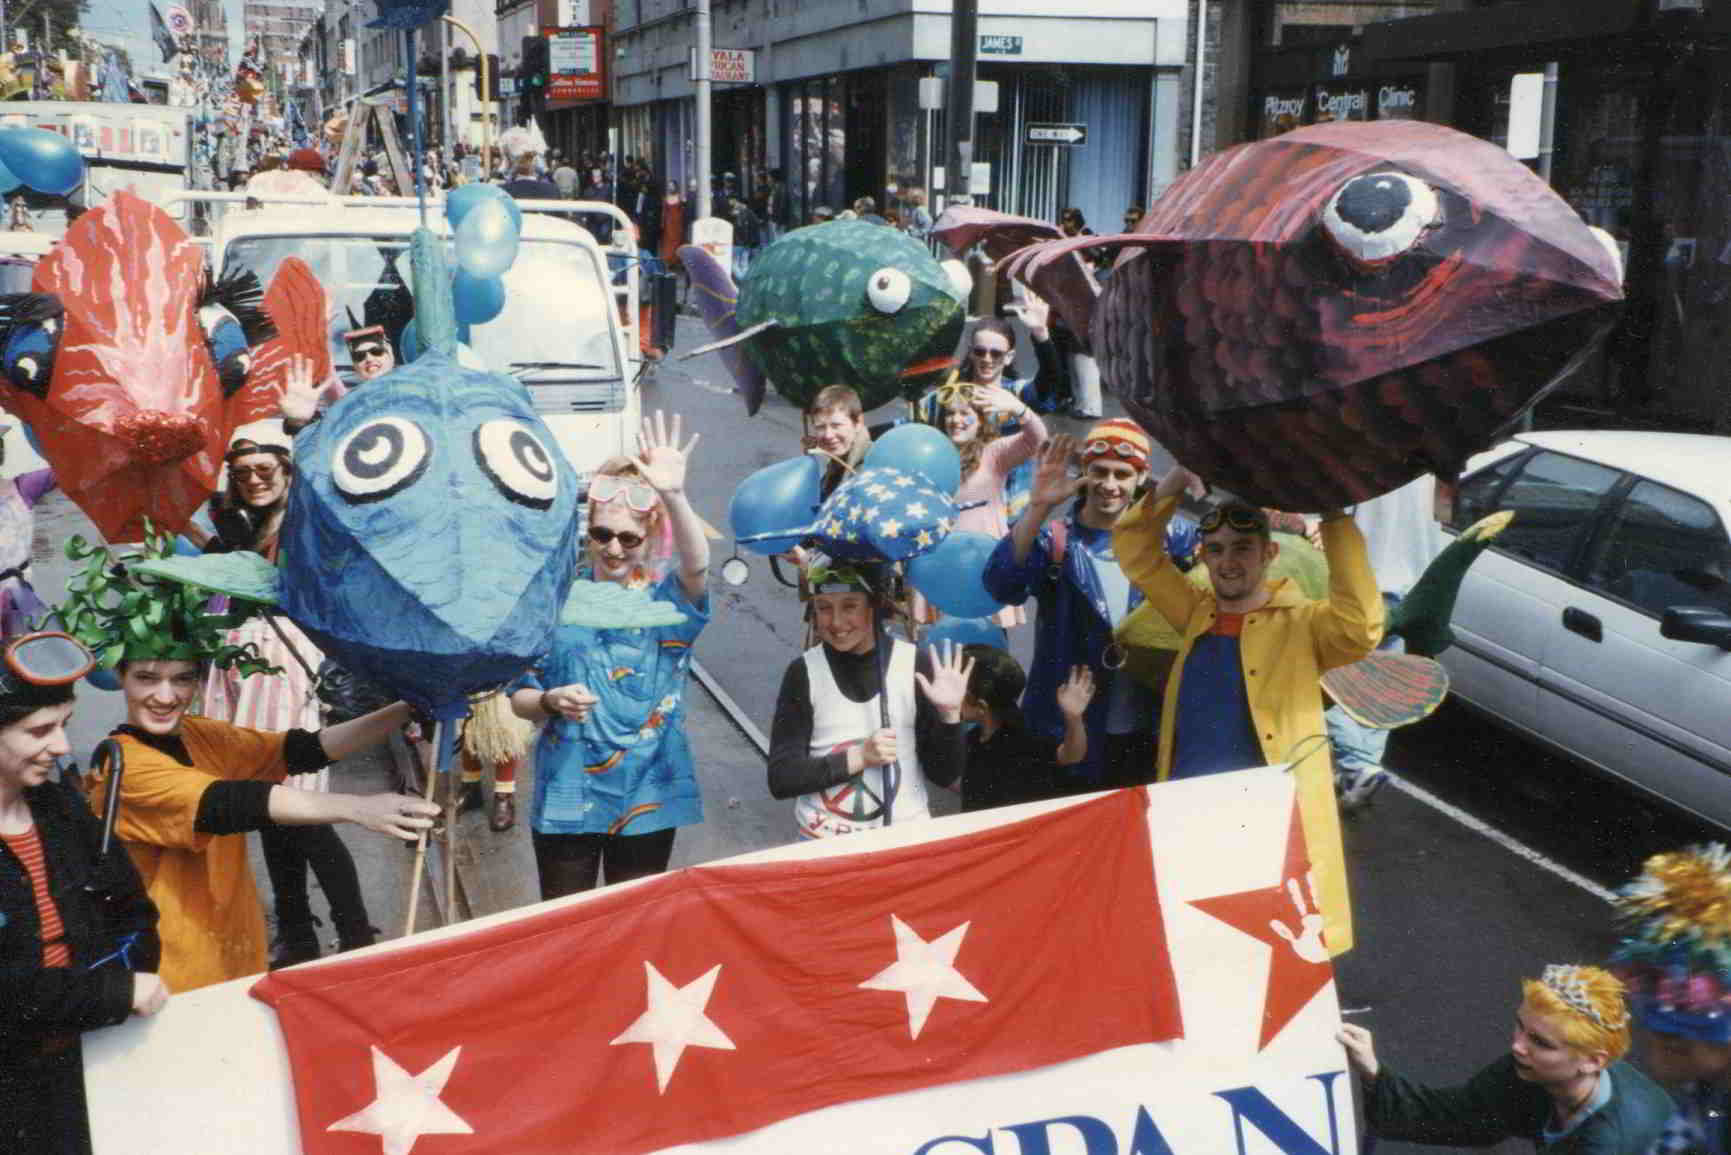 Swim Handspan Theatre large cane fish waving at overhead camera in crowded street parade